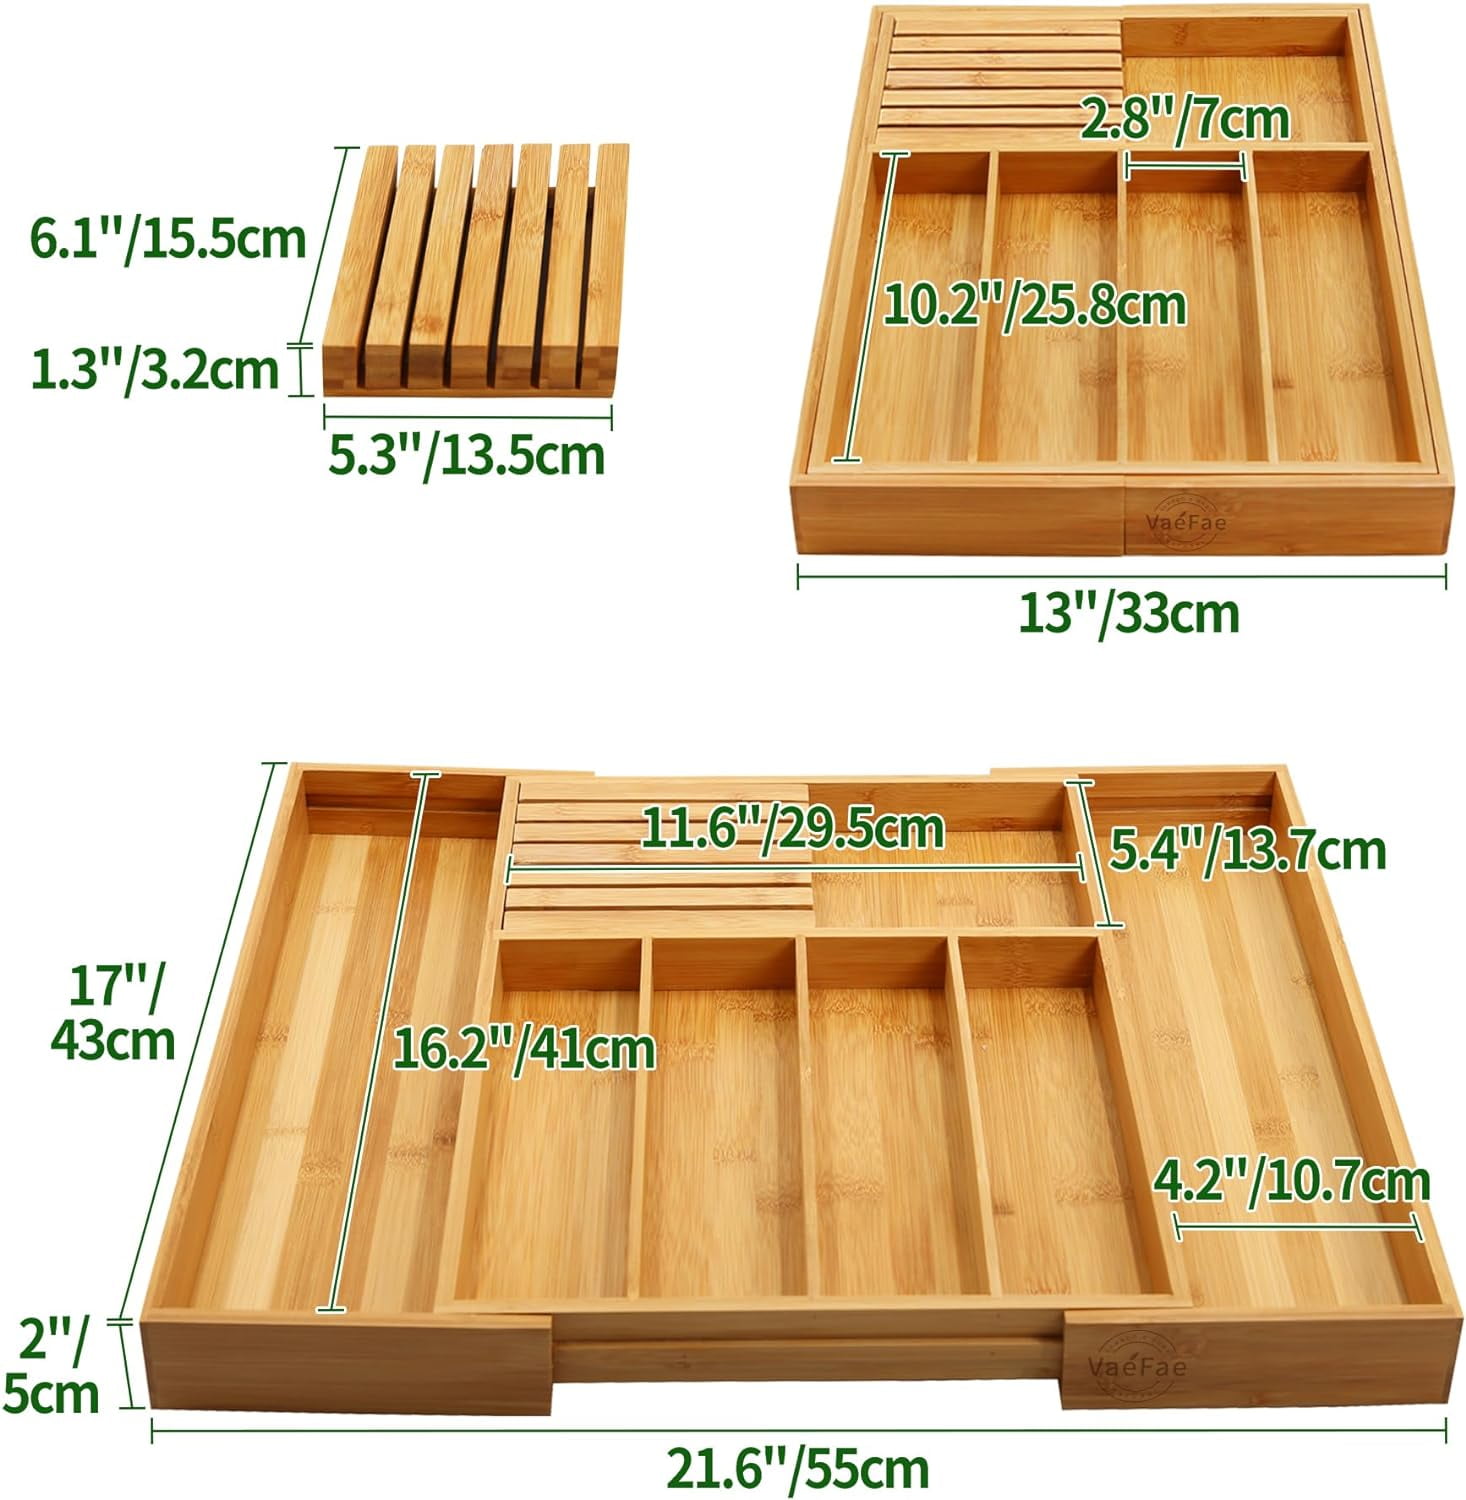 Home Basics Bamboo Expandable Cutlery Tray BH01853 - The Home Depot